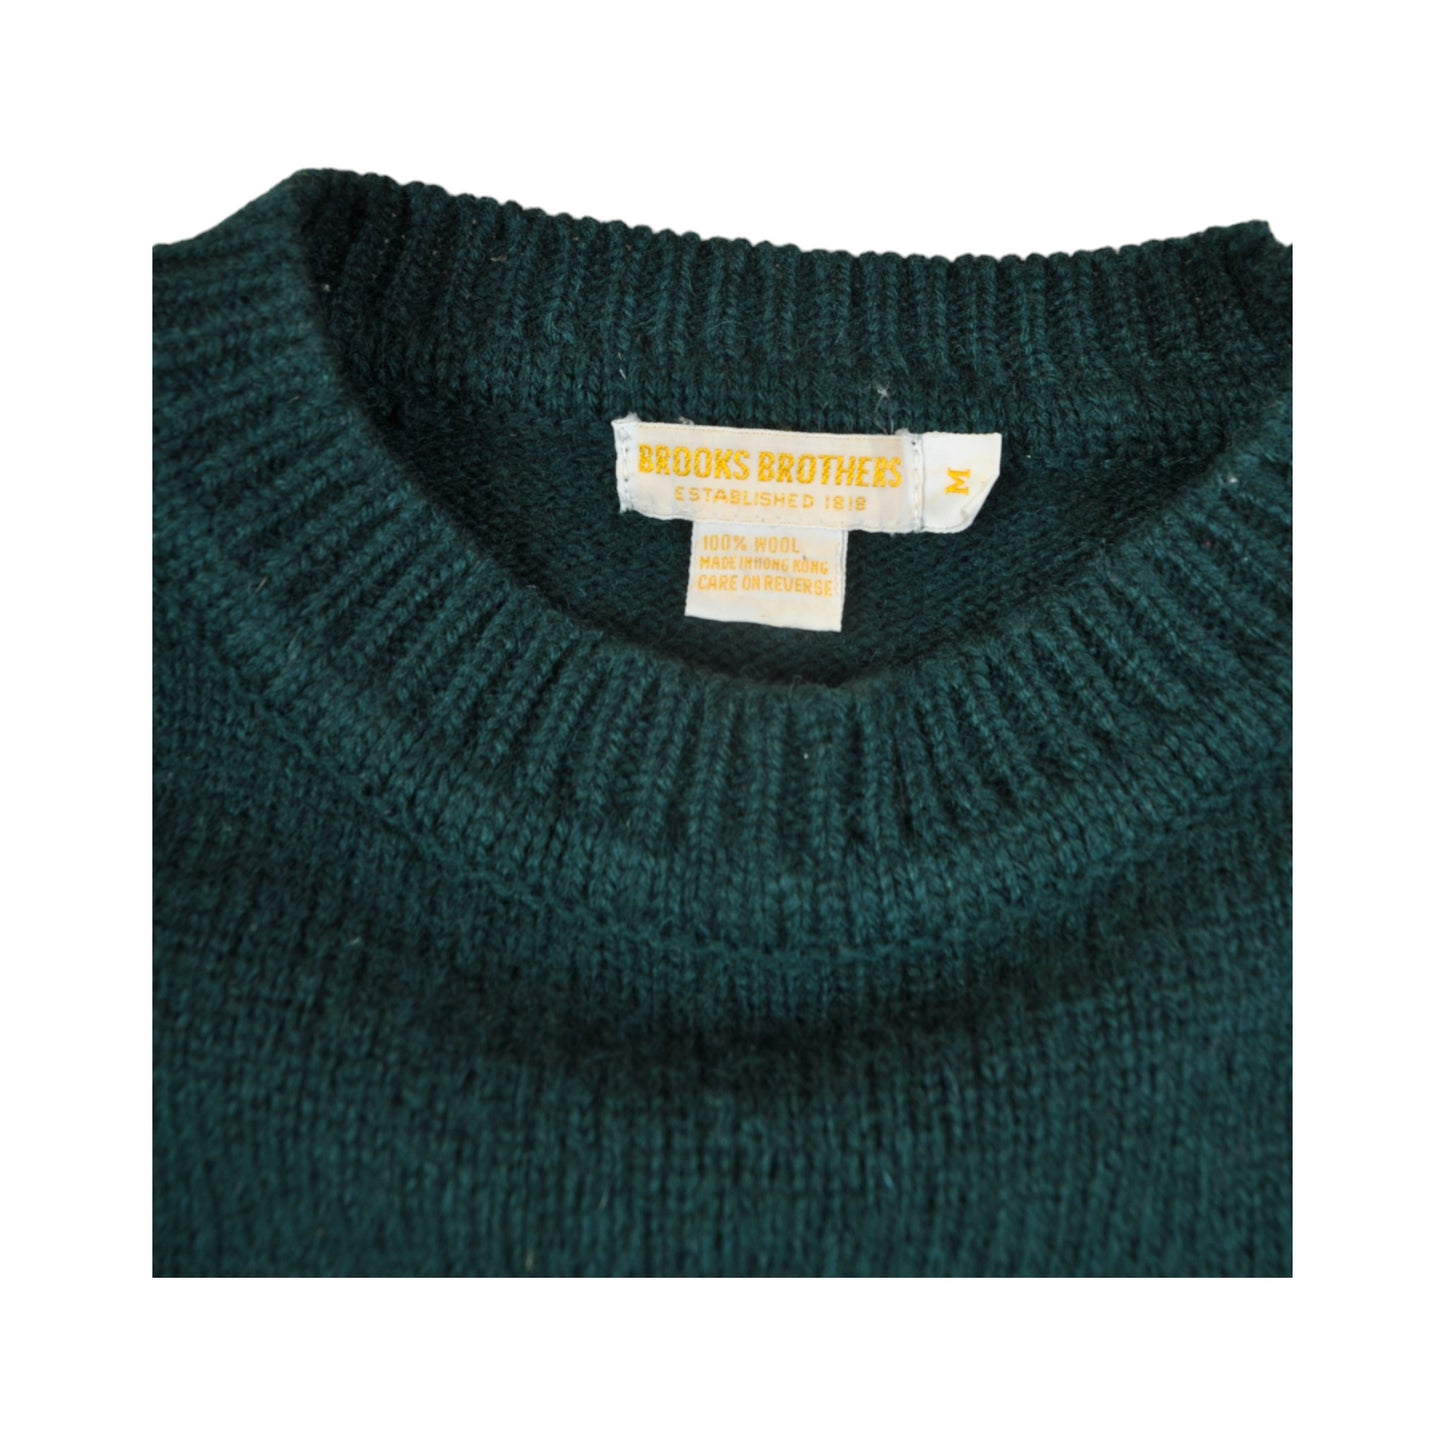 Vintage Knitted Jumper Retro Patch Pattern Green Ladies Small